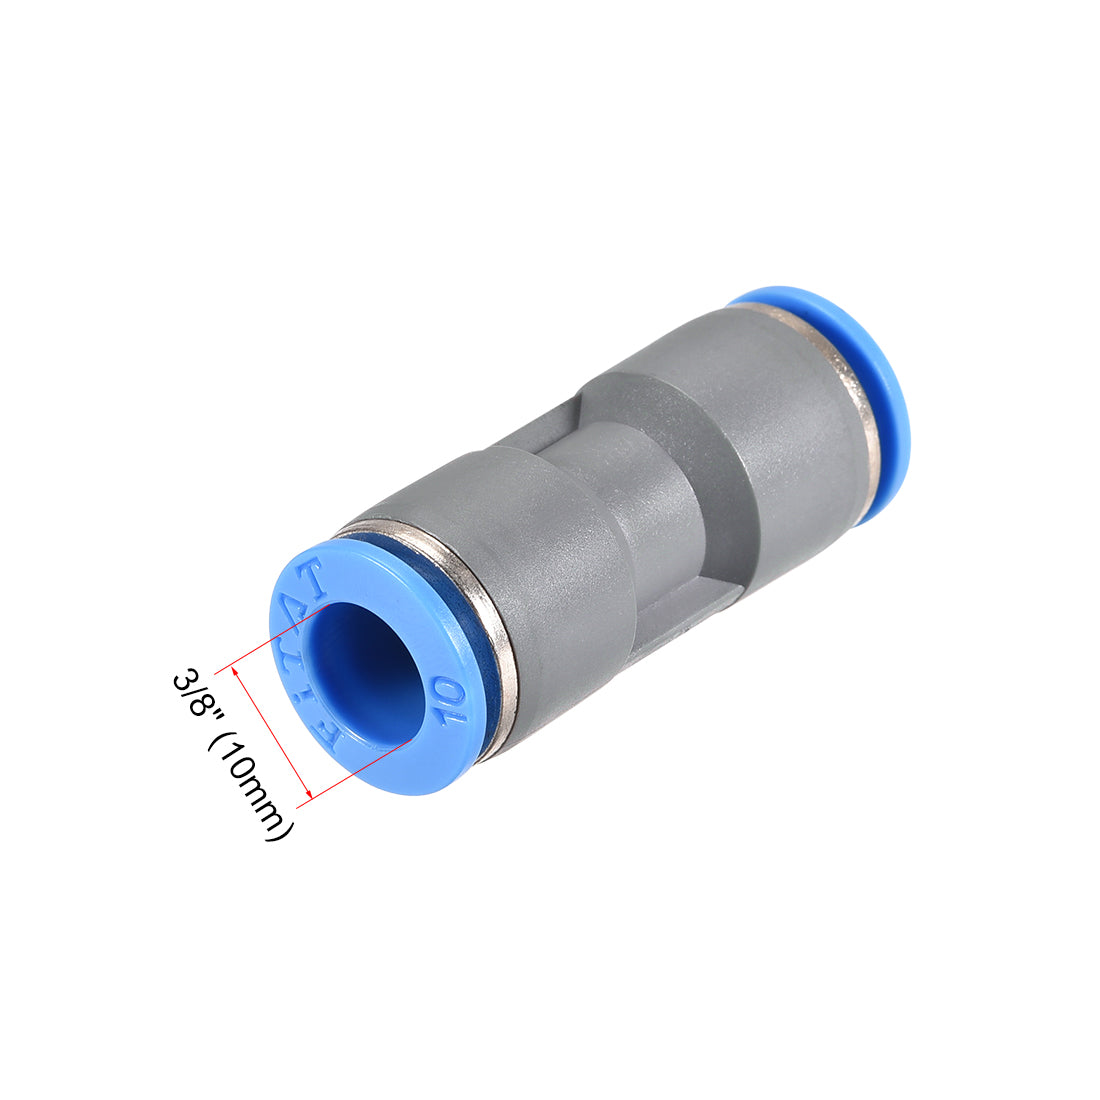 uxcell Uxcell Straight Push Connectors 10mm Quick Release Pneumatic Connector Plastic Union Pipe Tube Fitting Grey 2Pcs